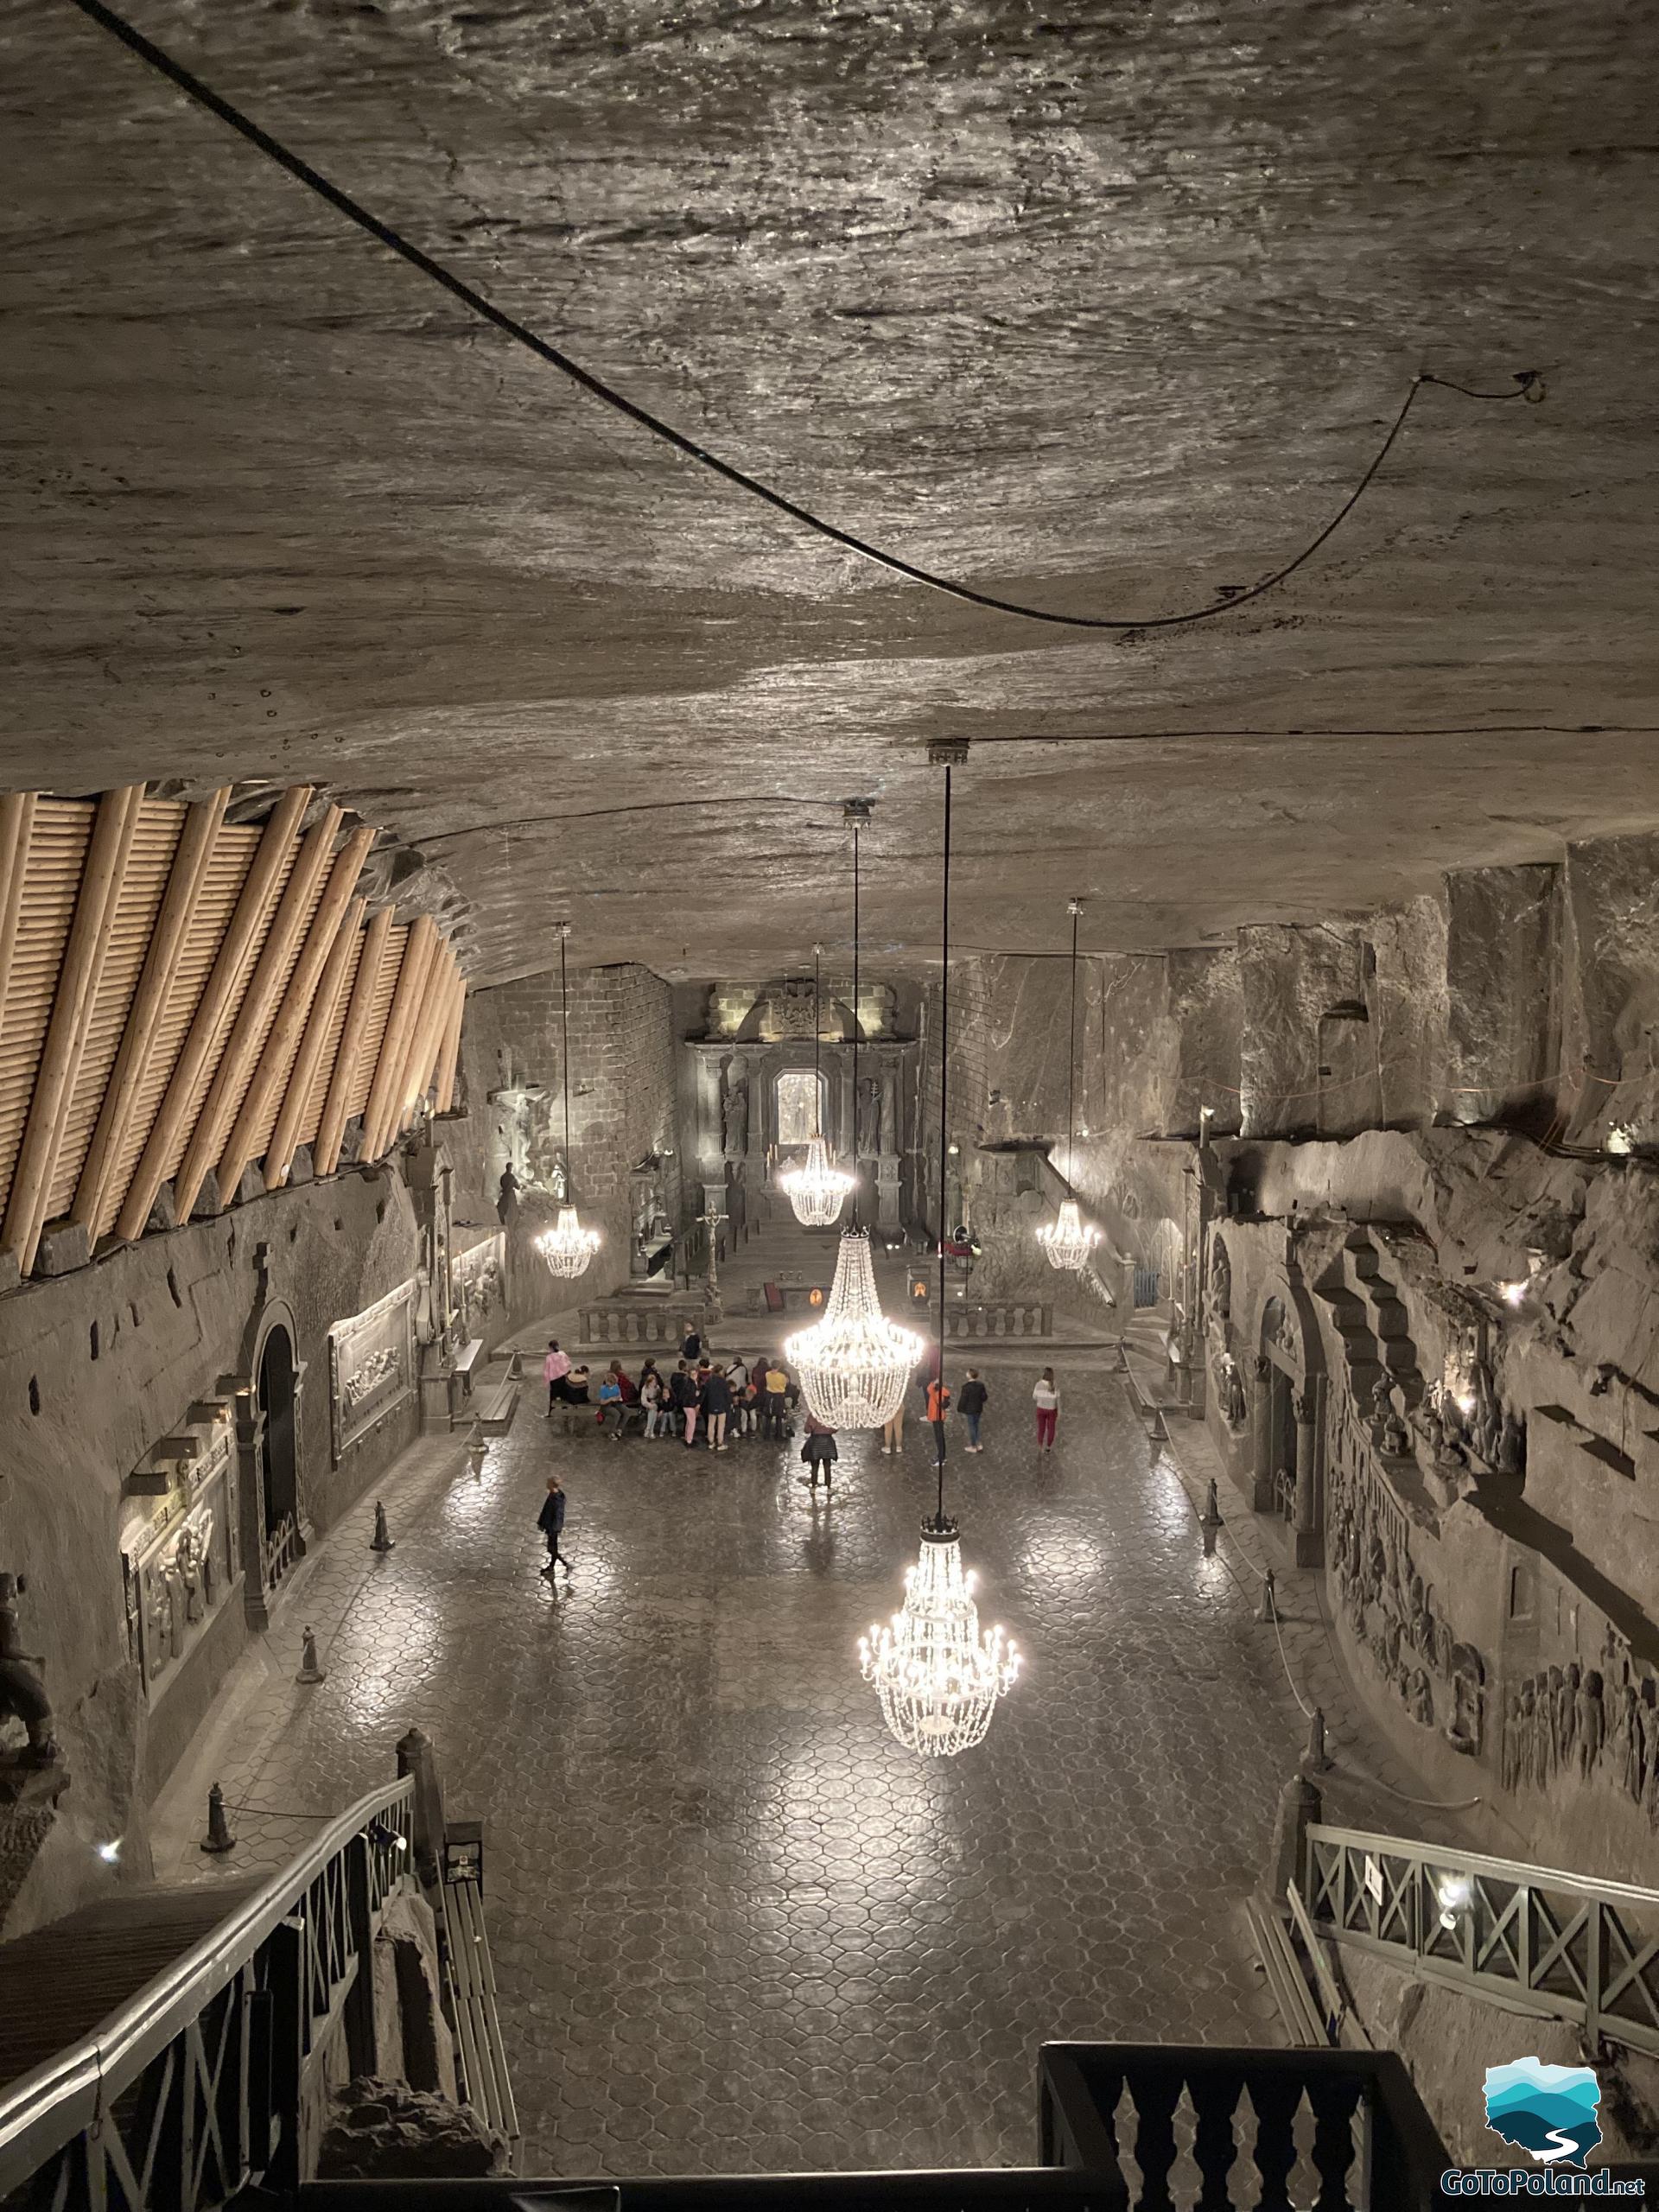 a salt hall with 5 chandeliers, lots of tourists, salt floor and walls